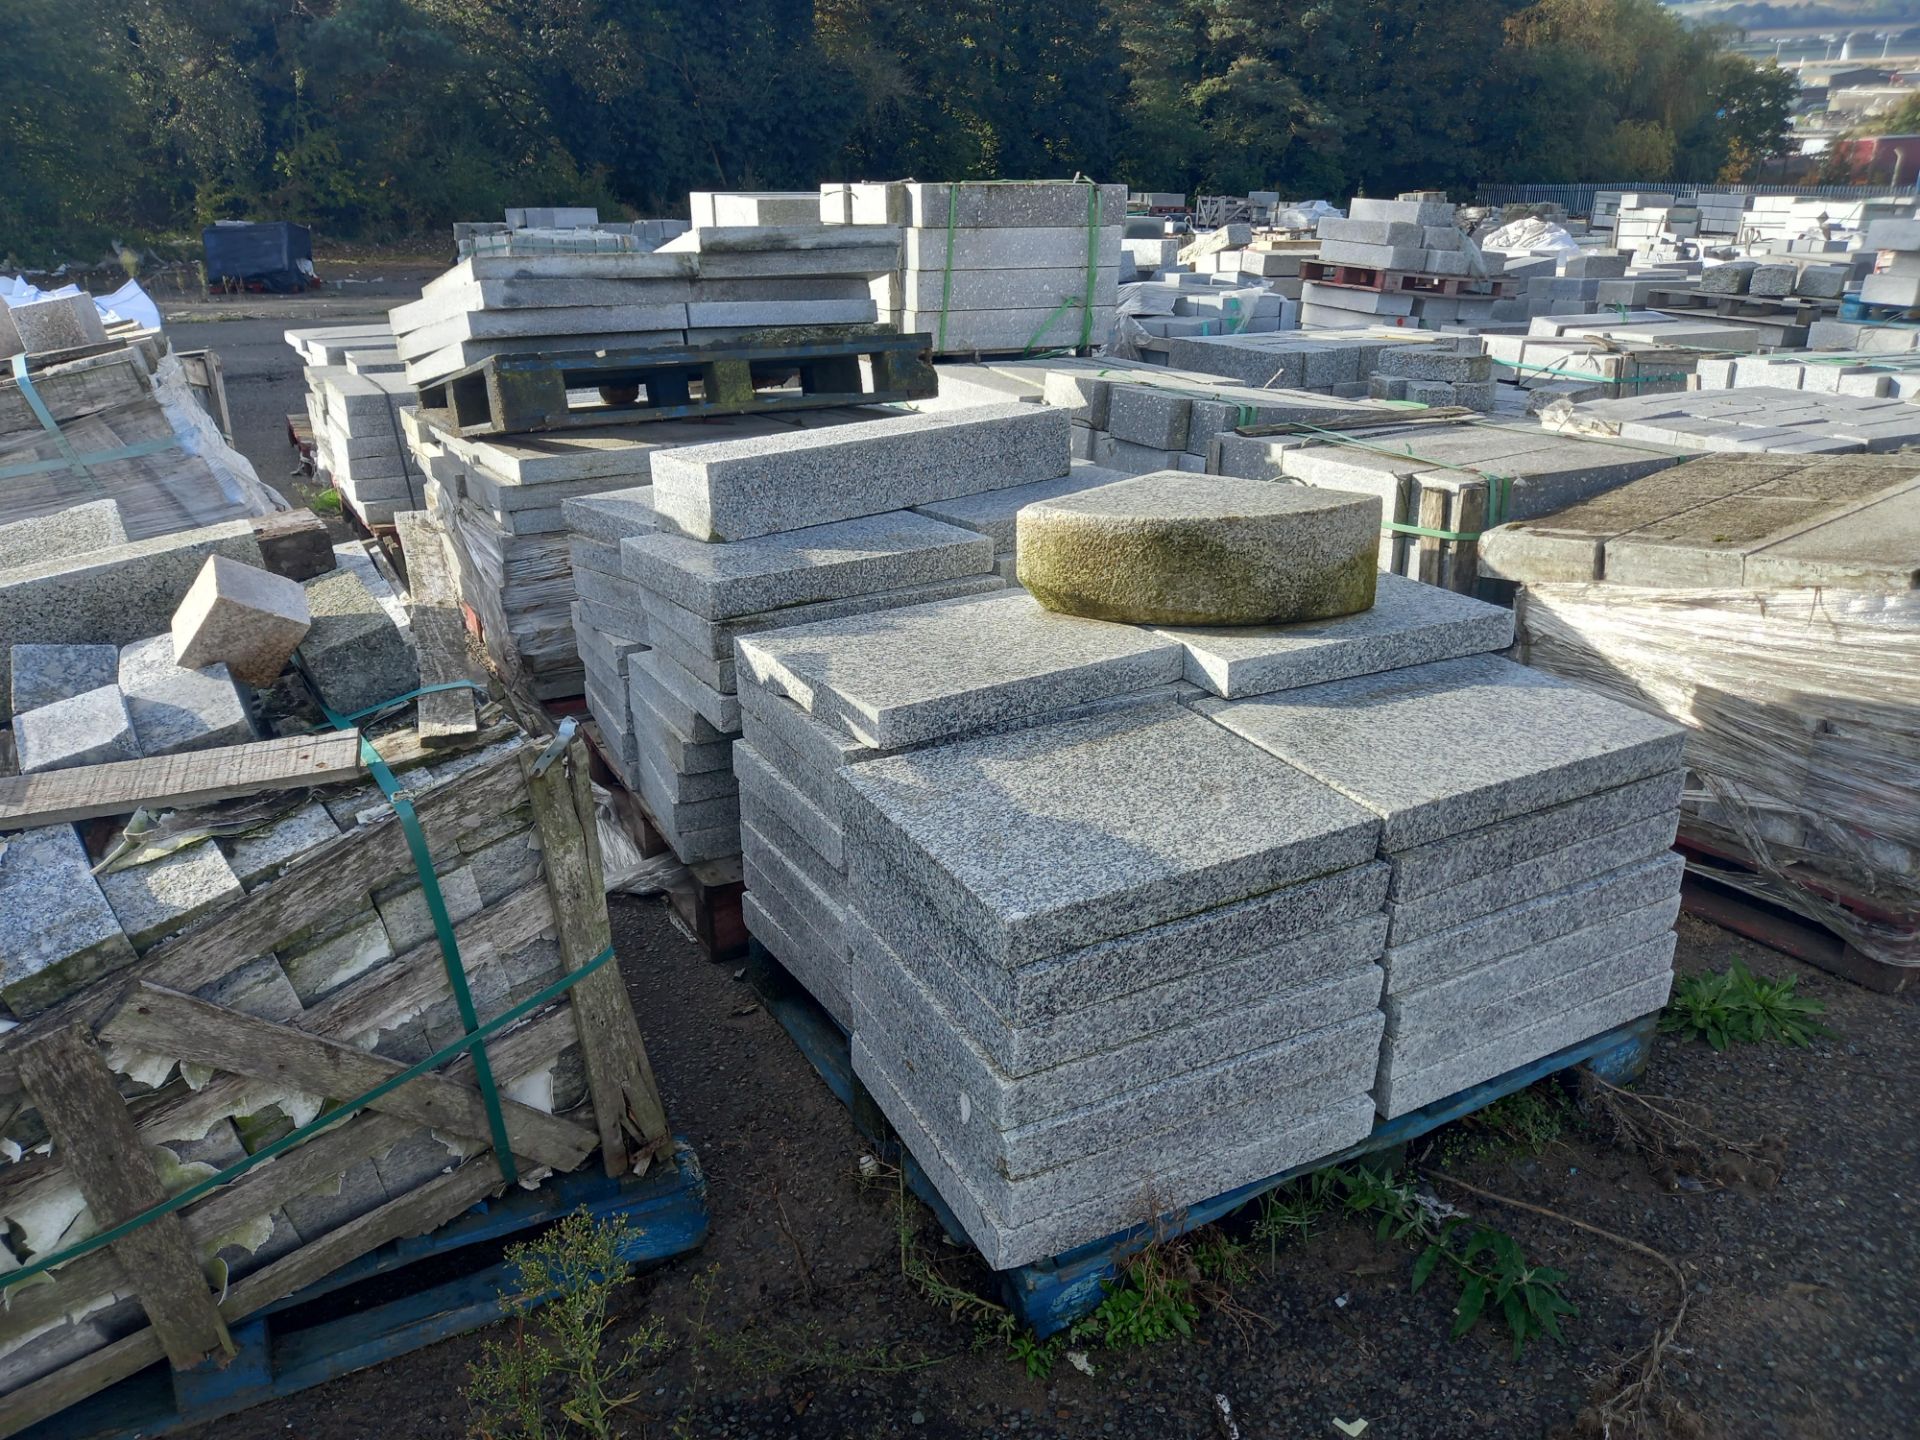 Approx 600 tonnes of granite and other natural stone products for hard landscaping, regeneration, an - Image 14 of 81